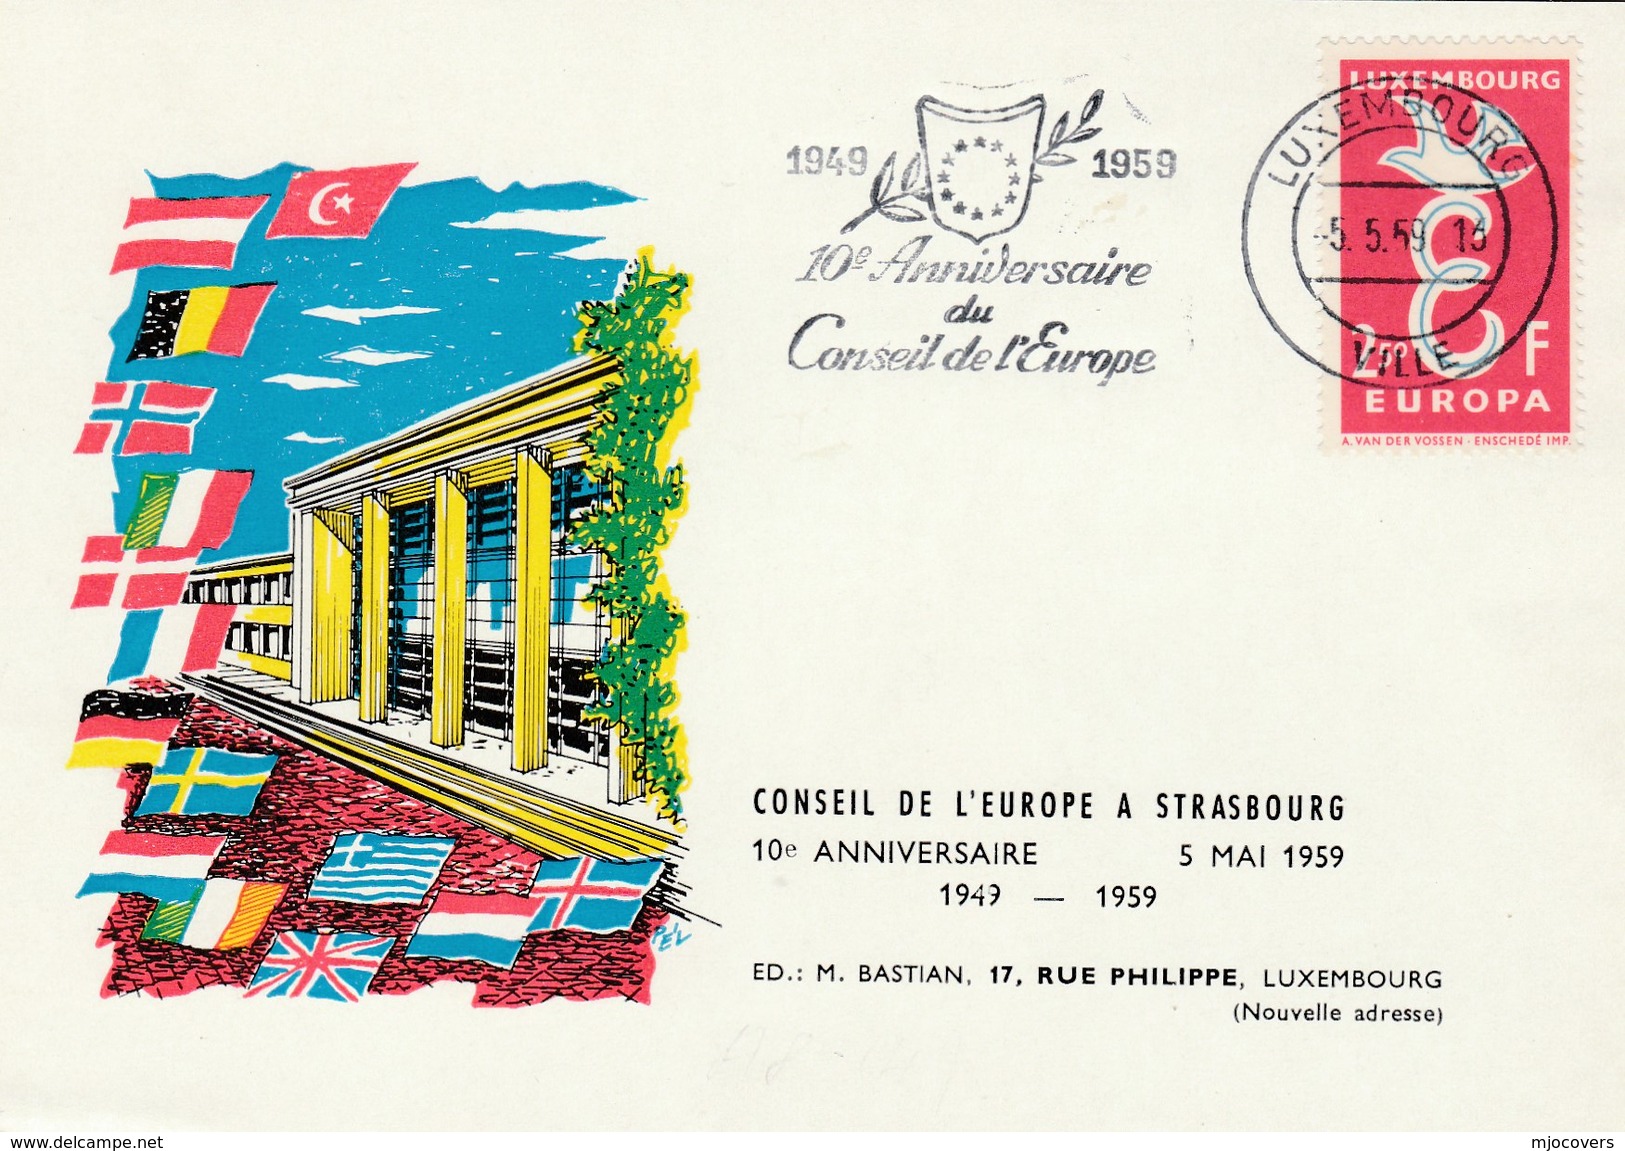 1969 Luxembourg COUNCIL OF EUROPE 10th ANNIV EVENT COVER Card Stamps Europa European - Covers & Documents